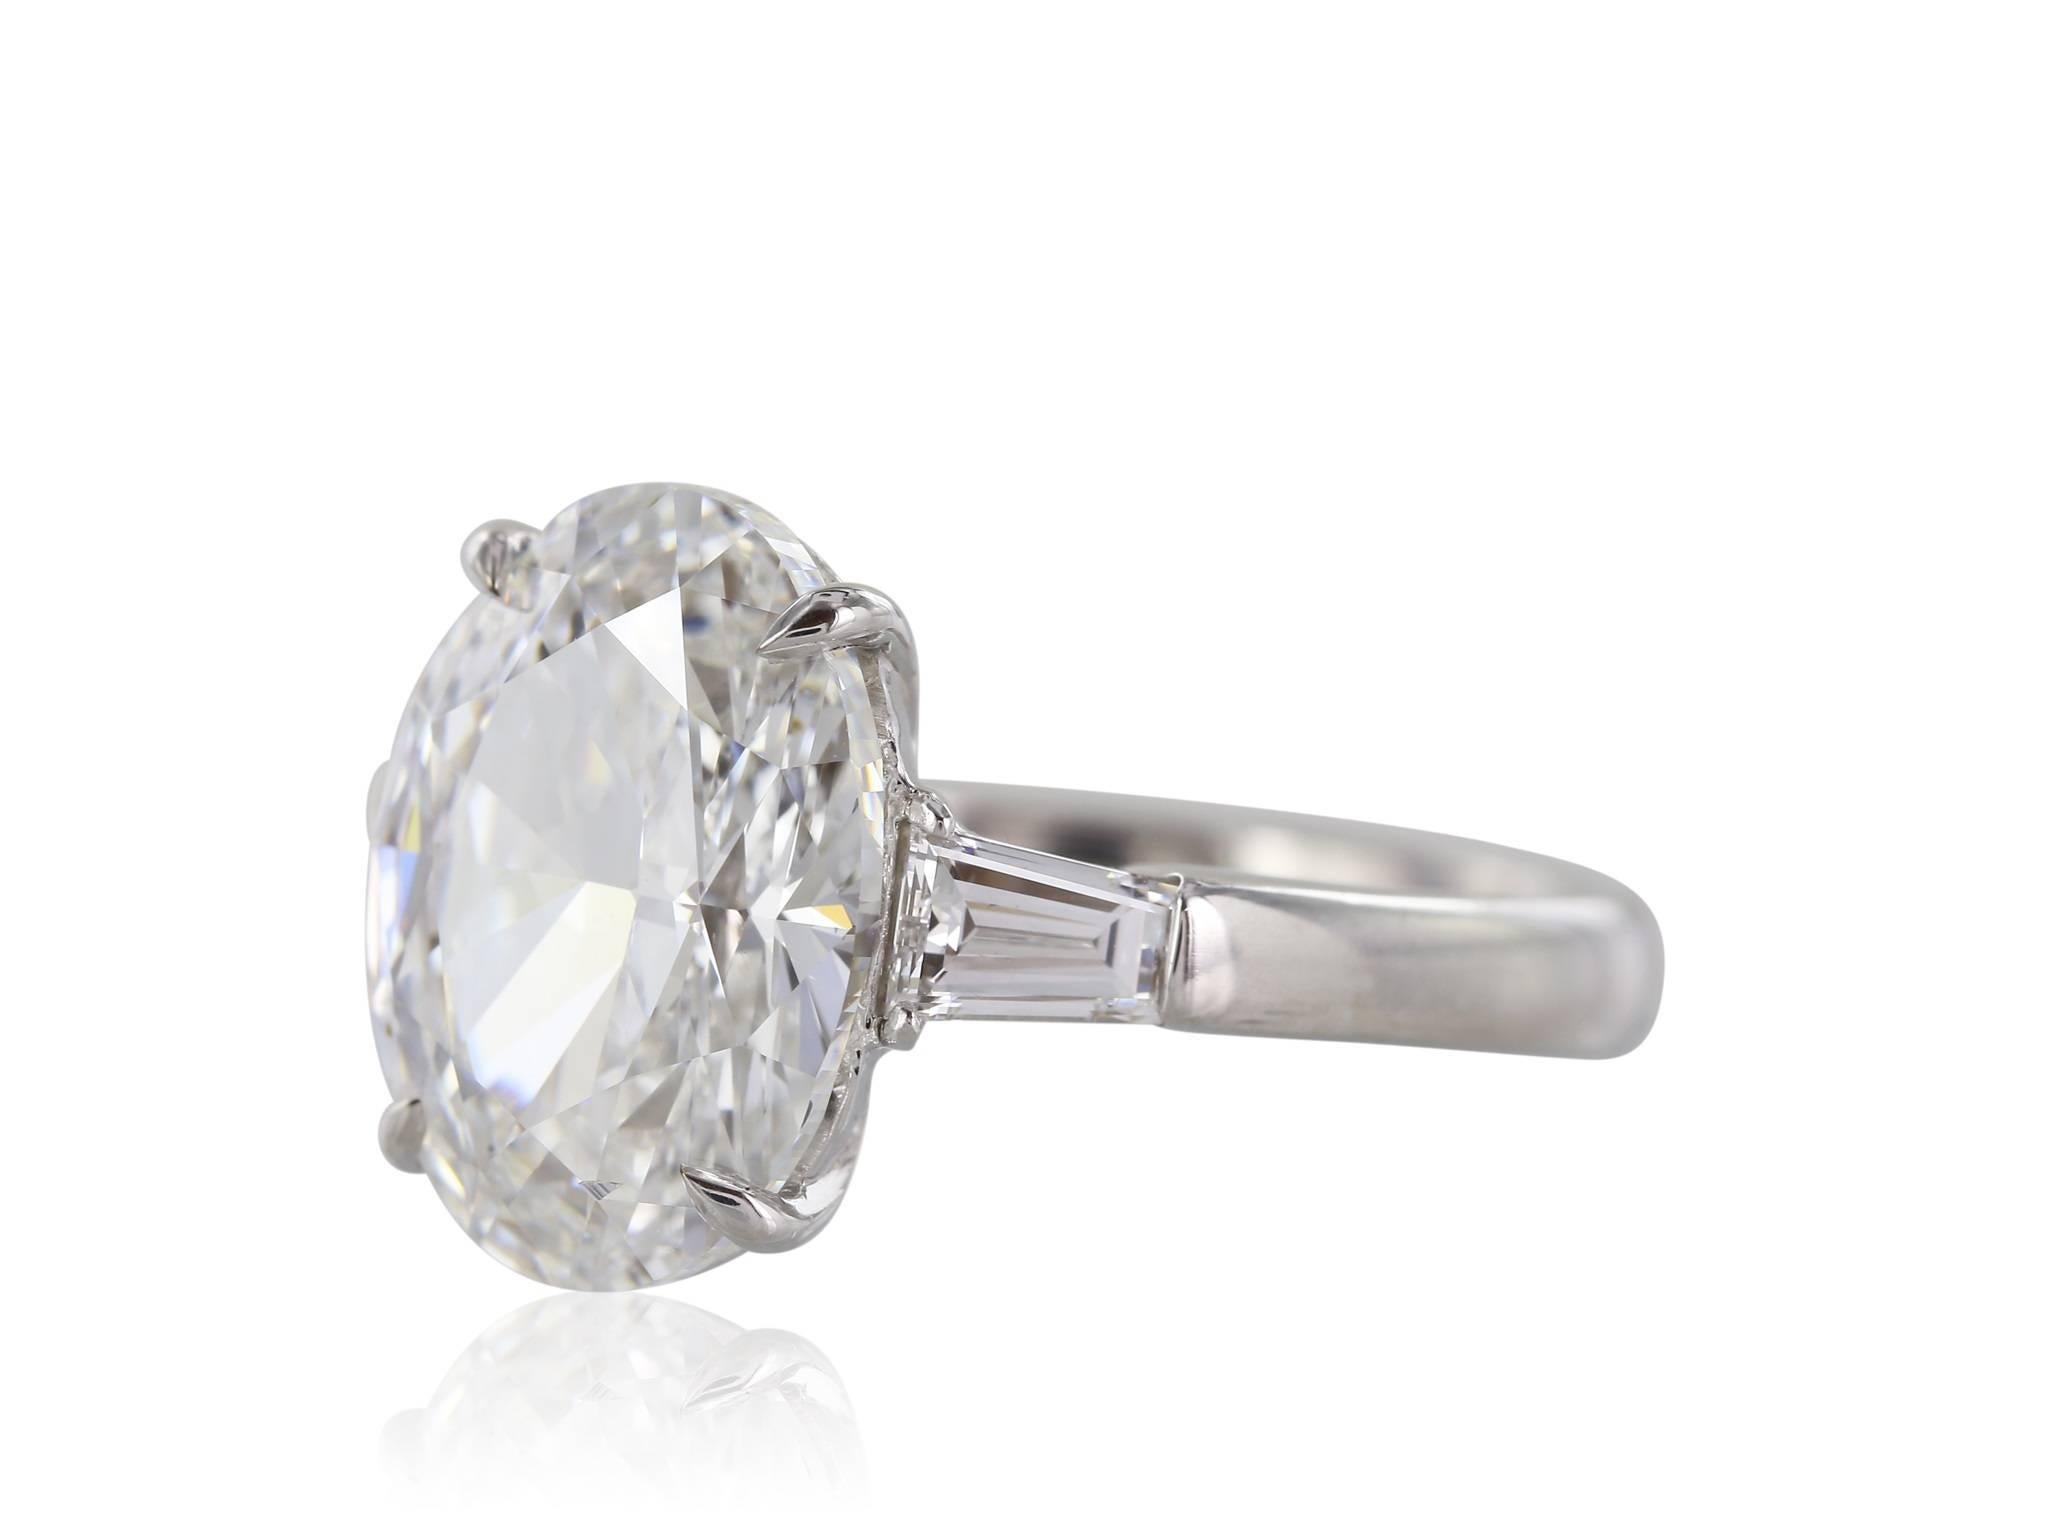 Platinum set three stone diamond ring featuring one GIA certified (#2171623454) 5.02 carat oval diamond with a color of F and a clarity of VS2.  The oval diamond is flanked by two tapered baguettes with a color of F, clarity of VS2 and combined